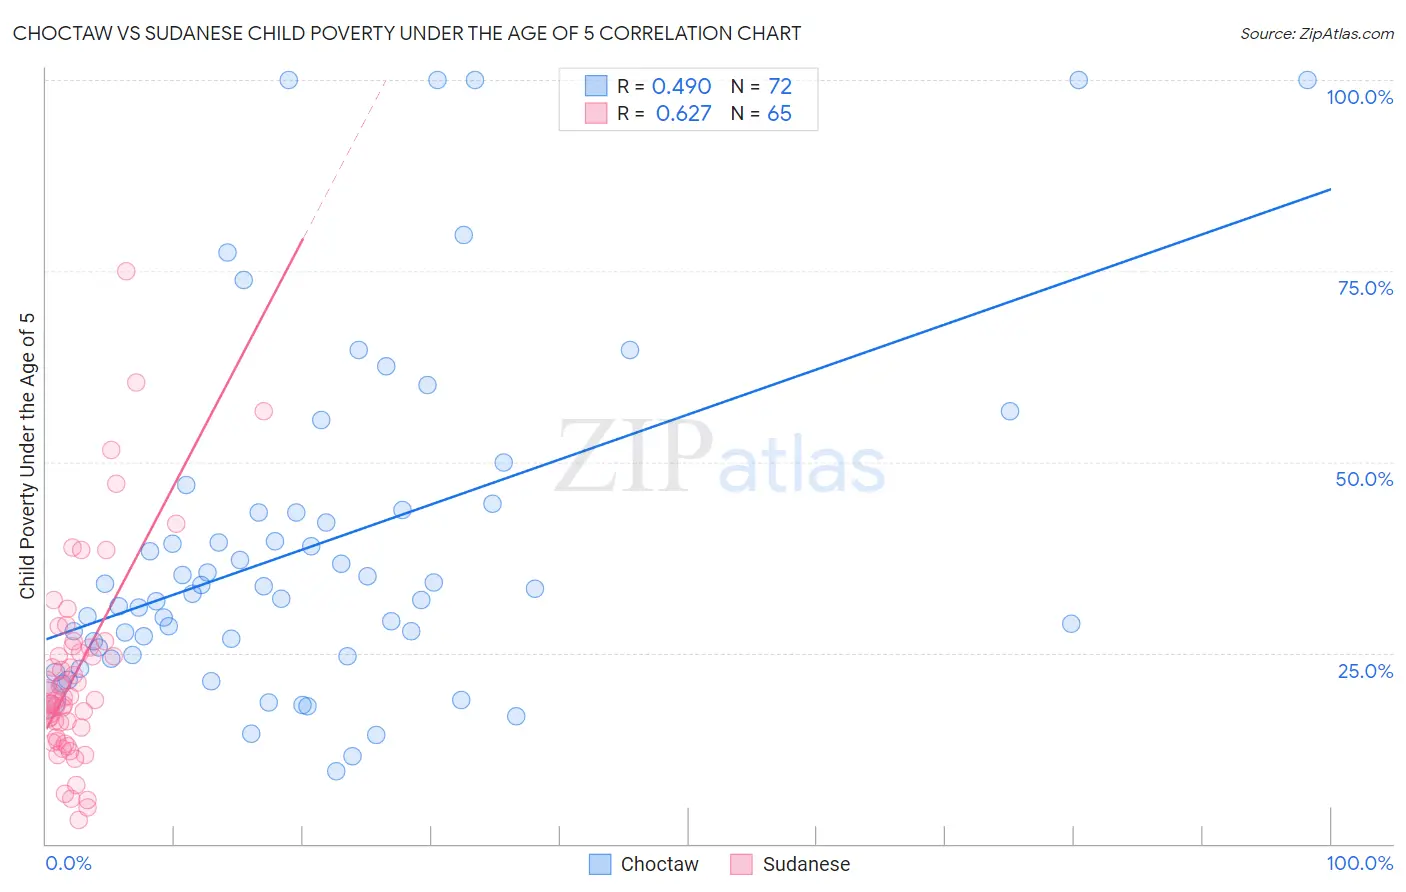 Choctaw vs Sudanese Child Poverty Under the Age of 5